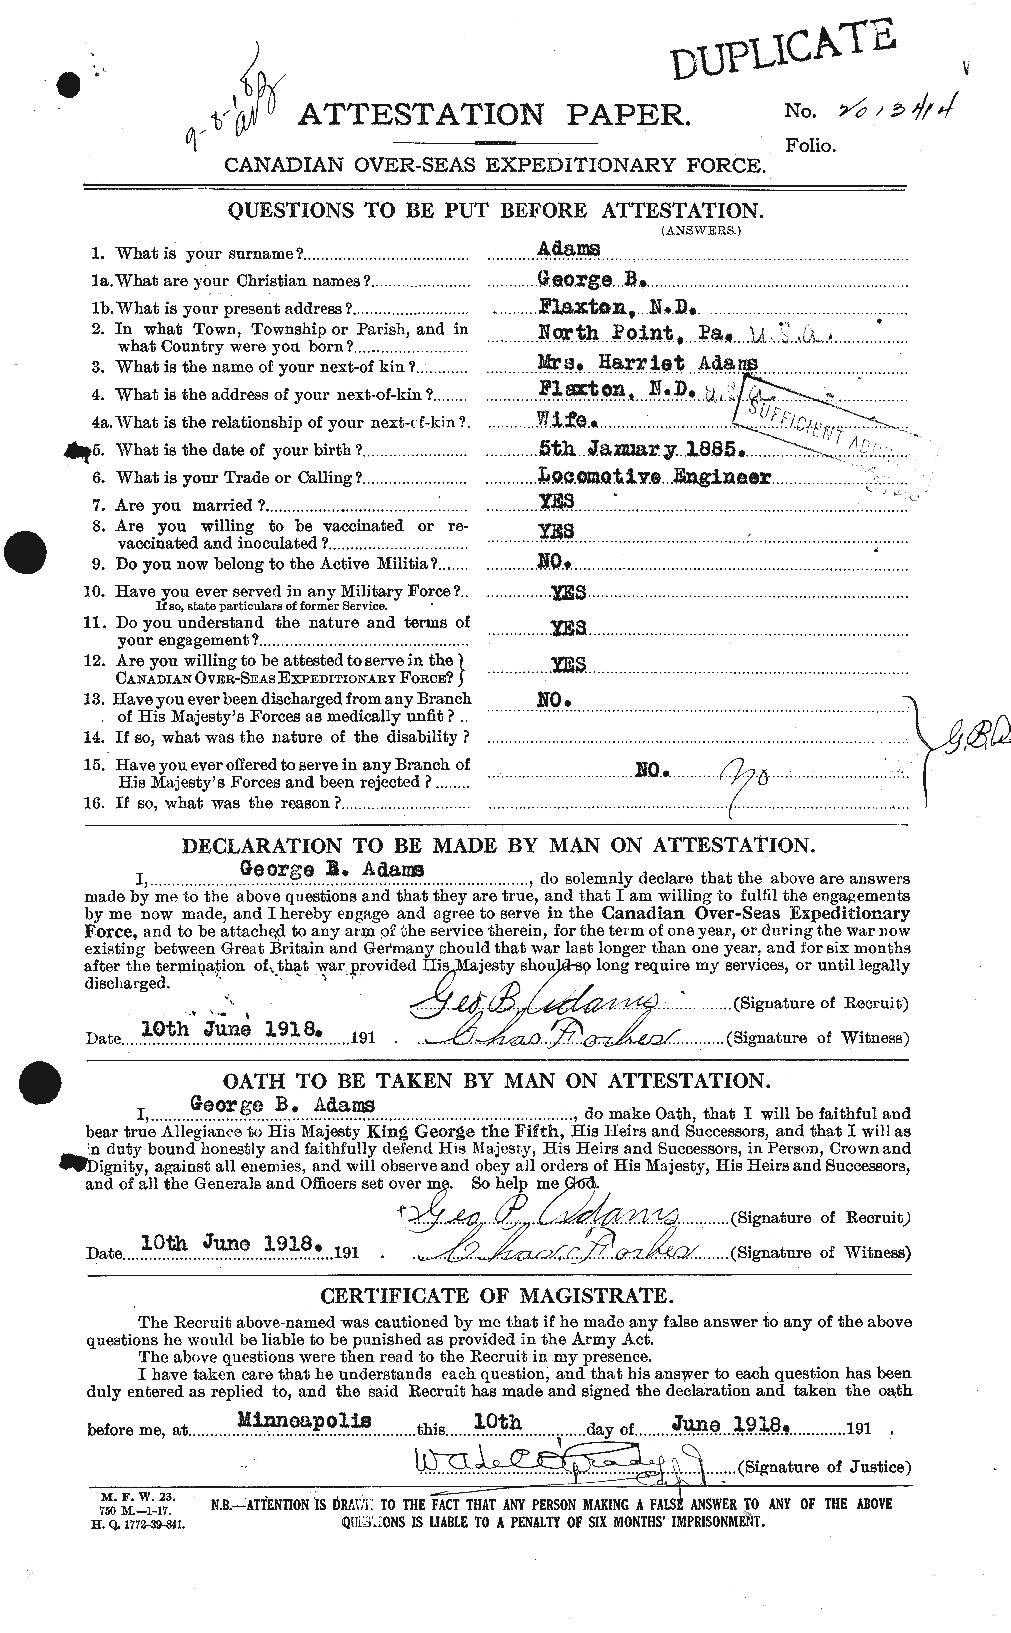 Personnel Records of the First World War - CEF 202548a